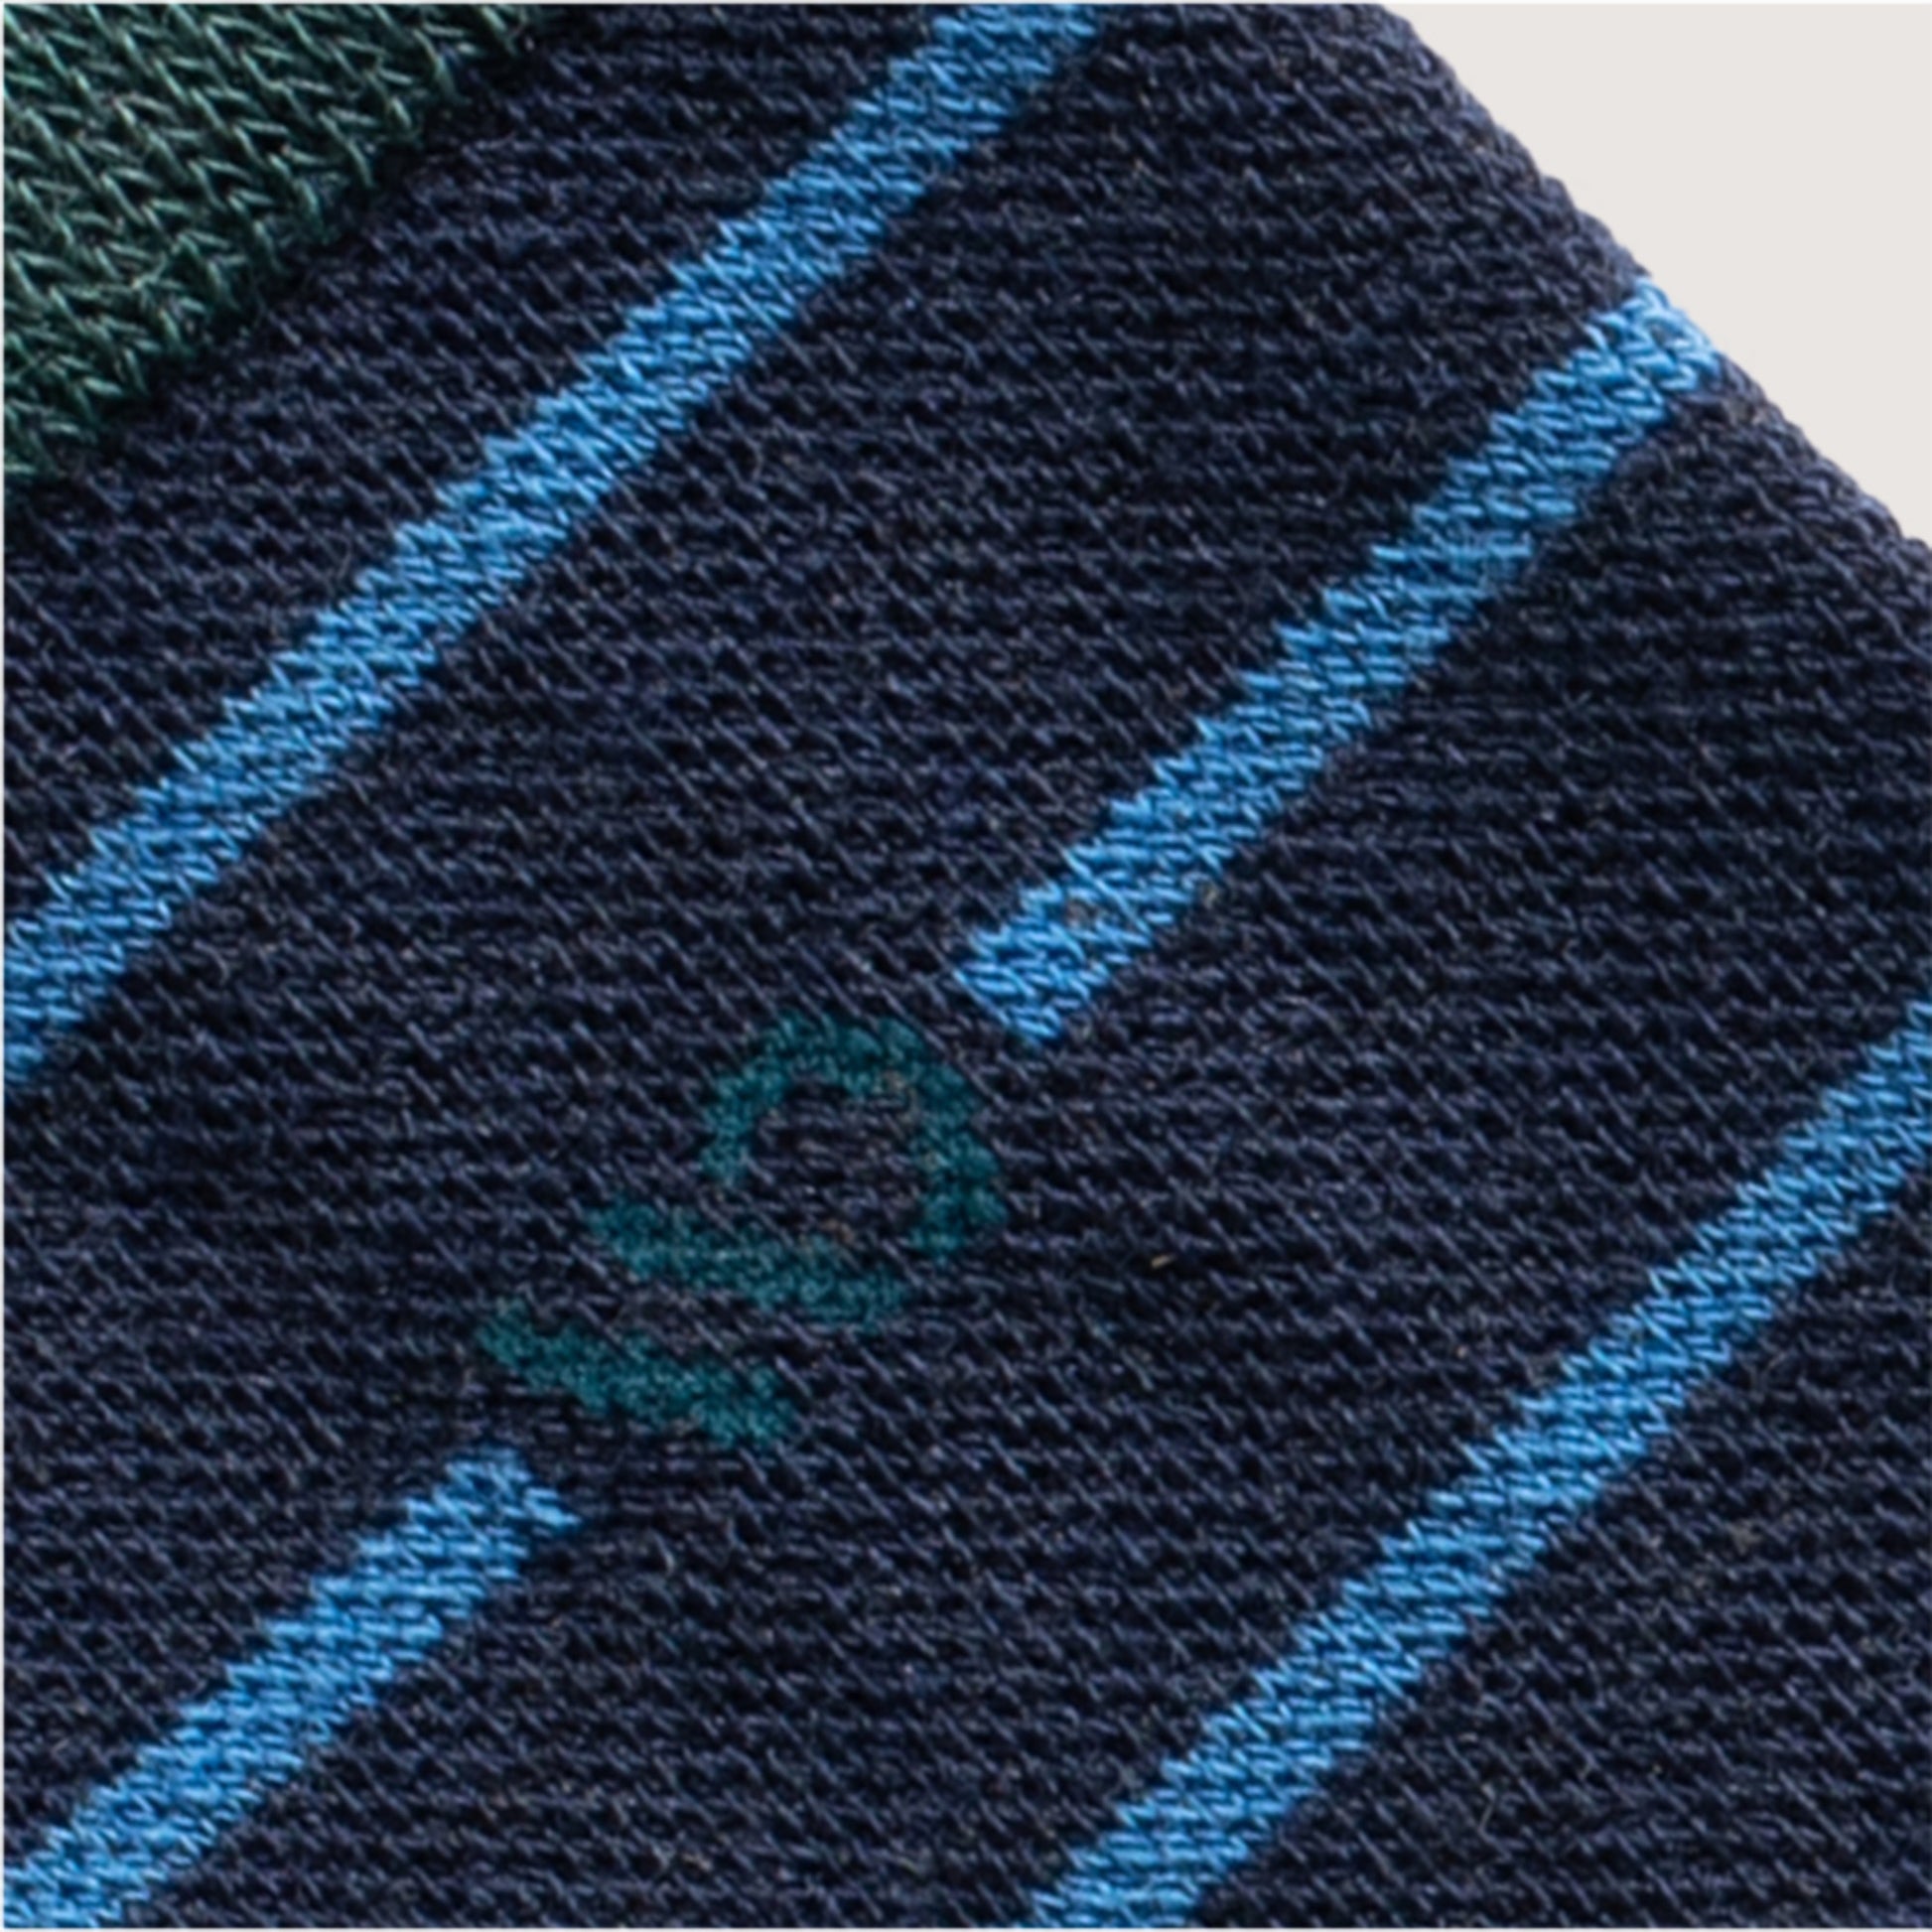 Detail featuring a dark teal logo with wide spaced blue stripe and denim body --Denim